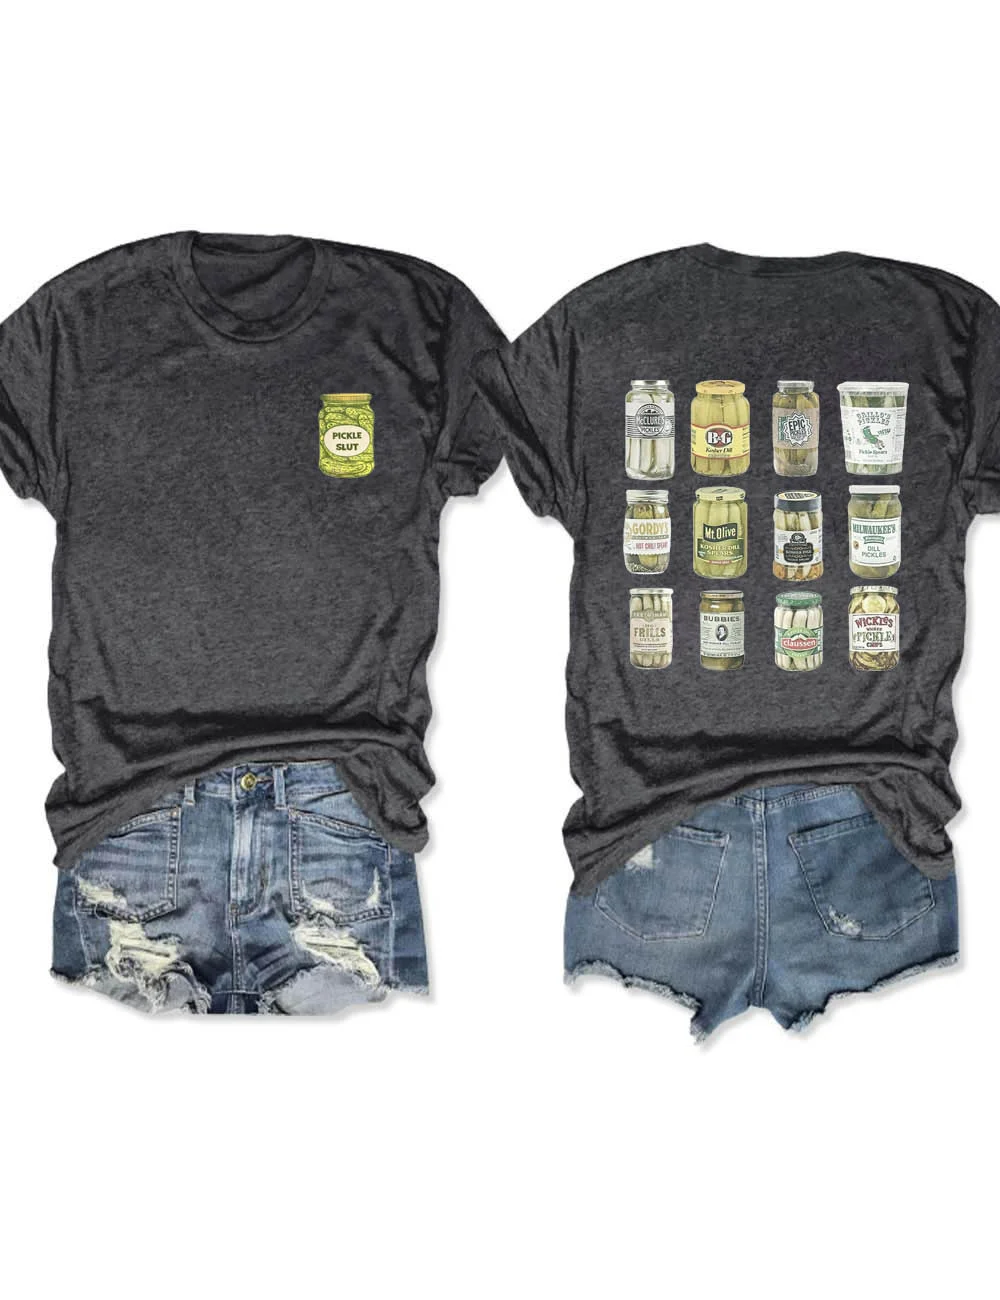 Canned Pickles T-shirt